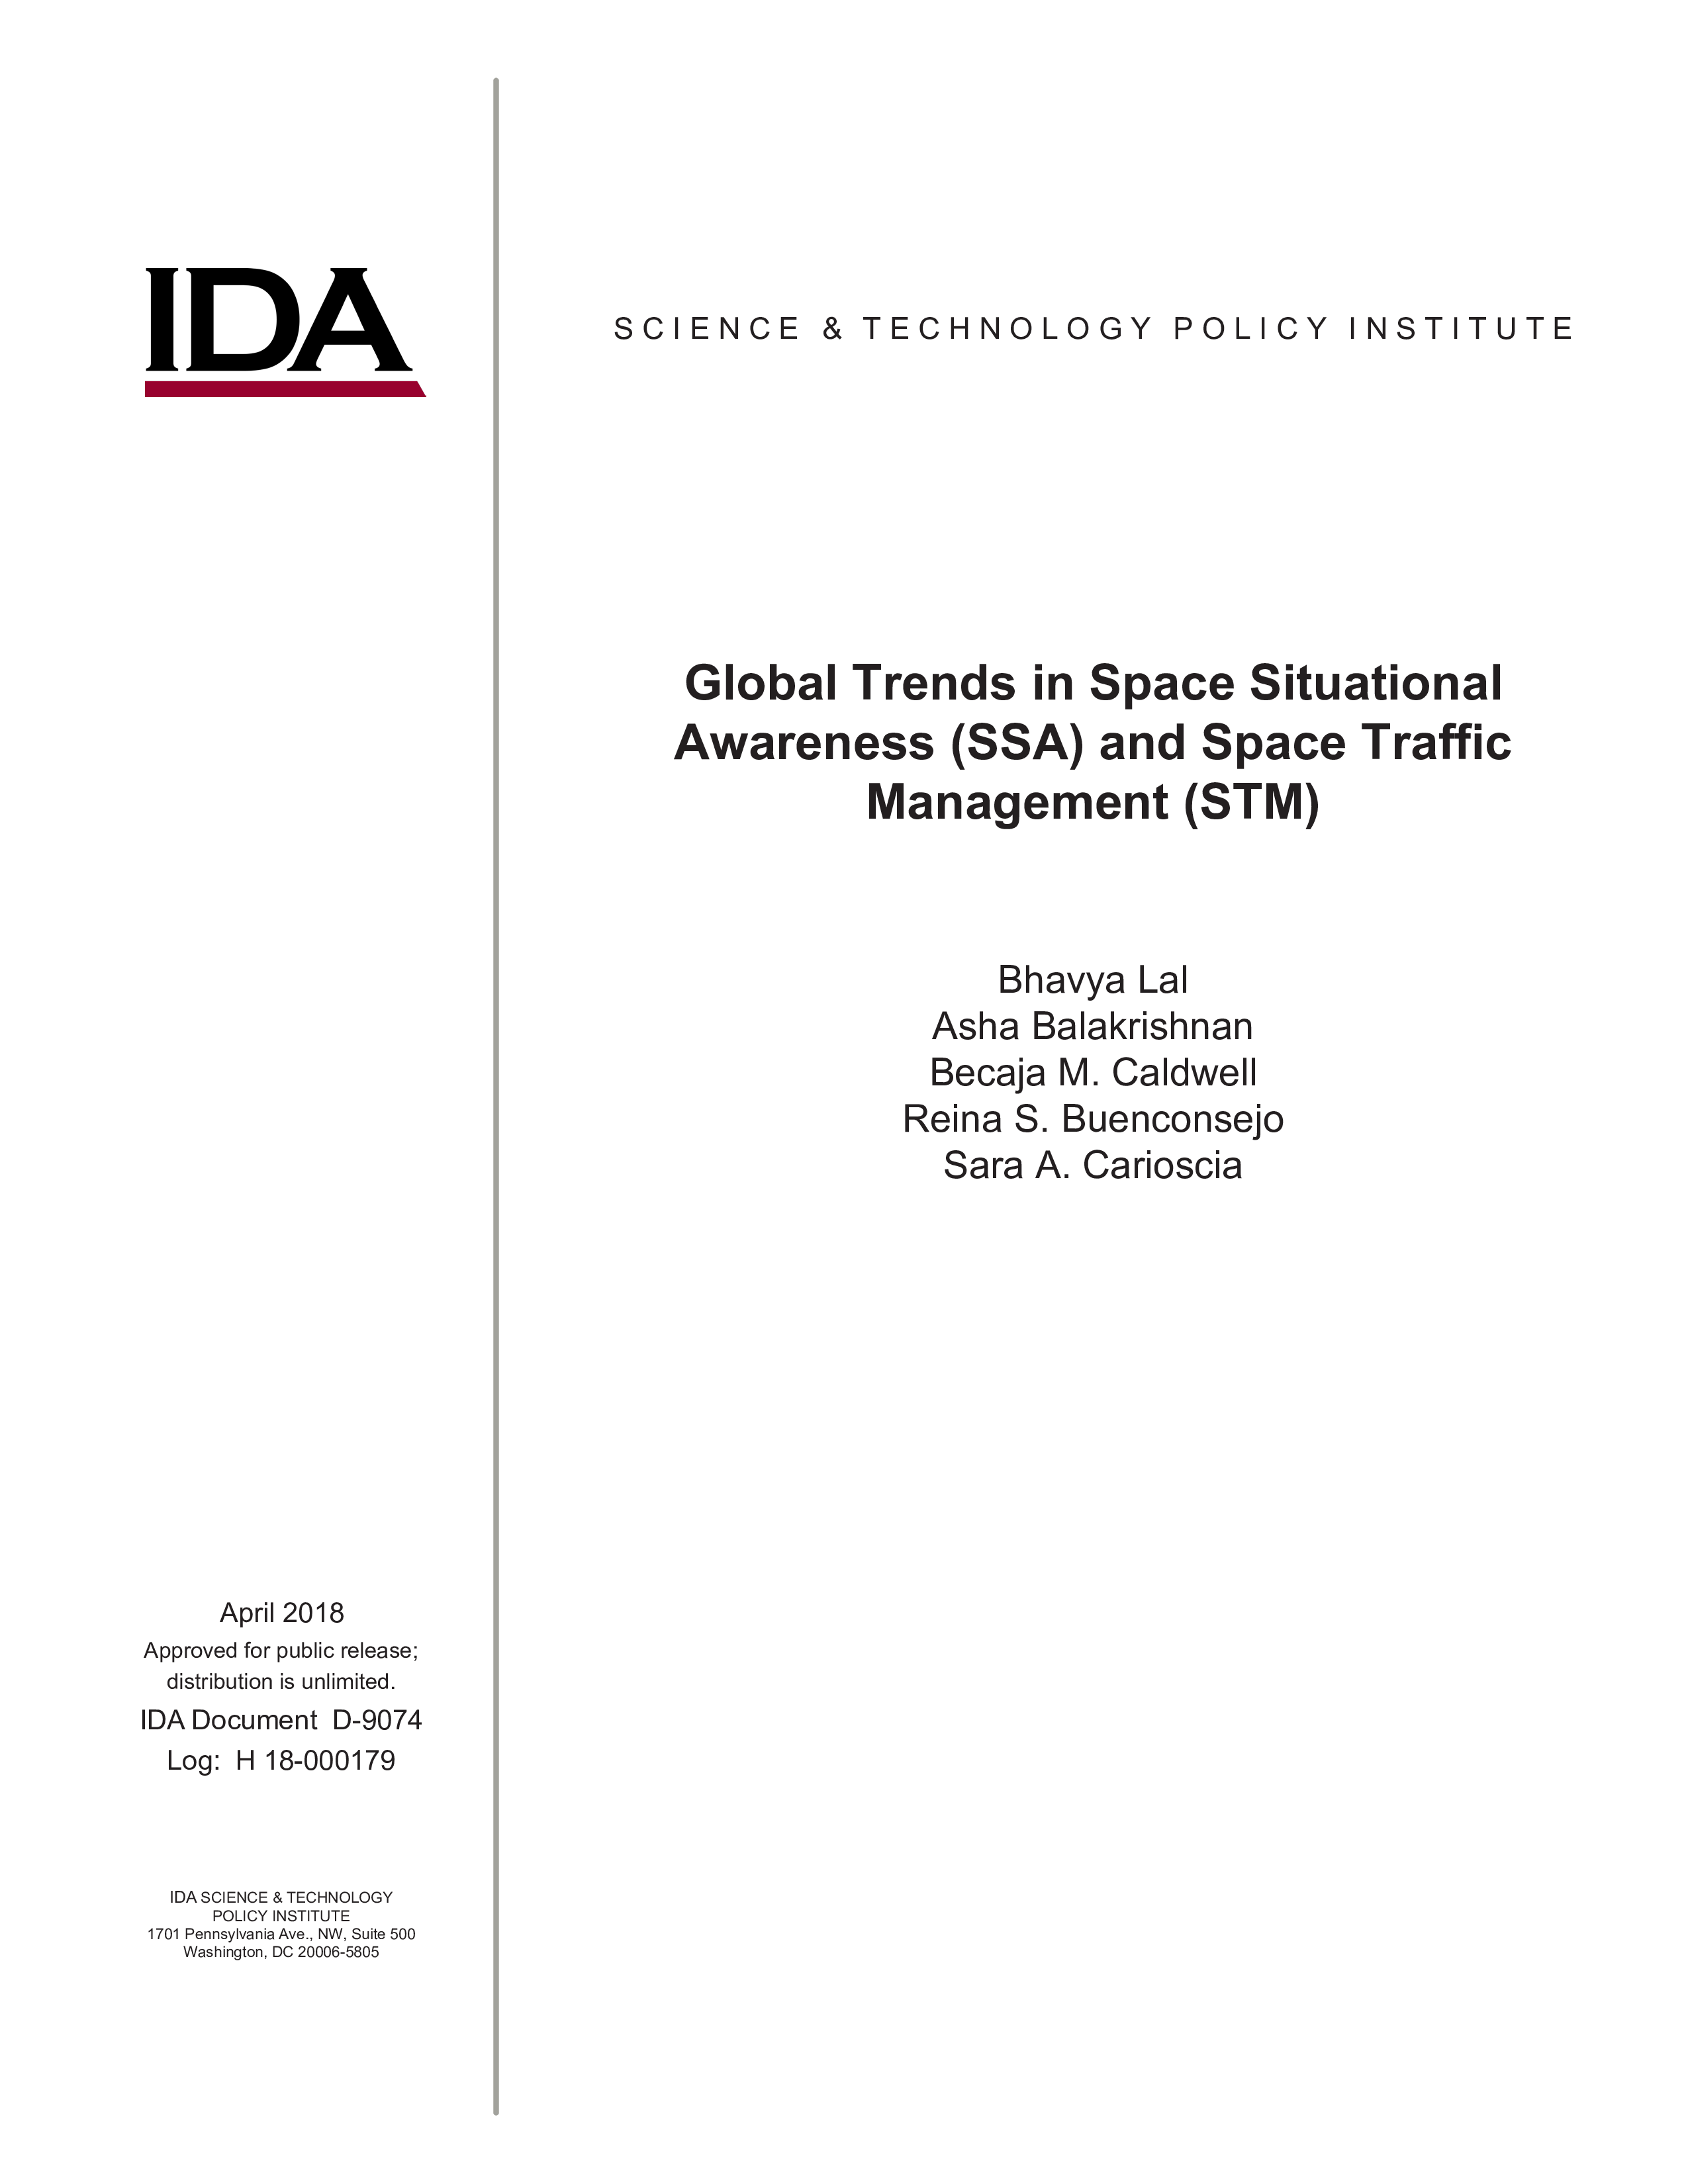 Global Trends in Space Situational Awareness (SSA) and Space Traffic Management (STM)